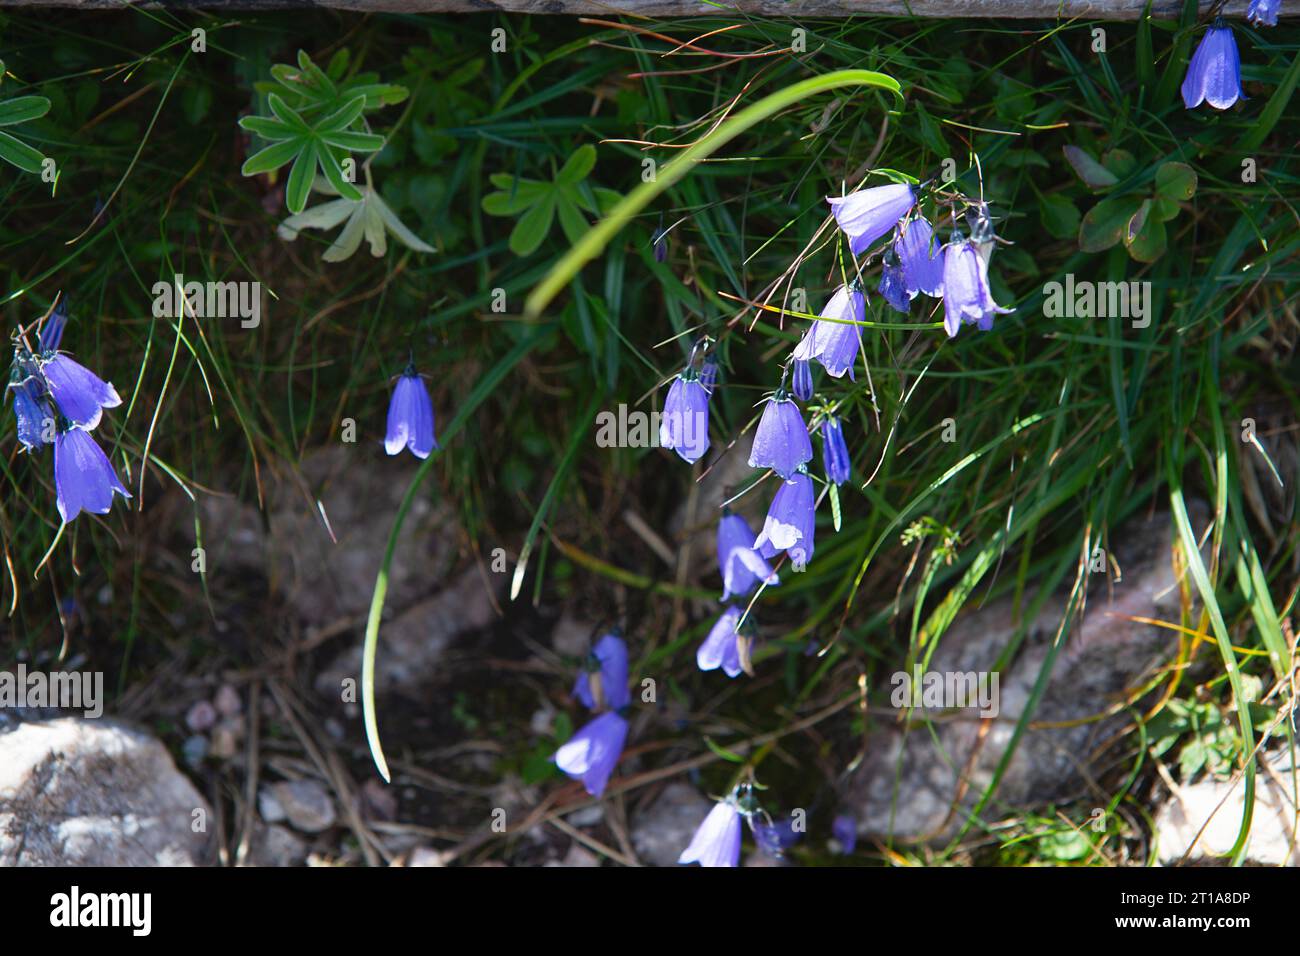 Blue bells flowers in the Alps mountains in summer. Purple bell flowers growing on the rock. Blooming of mountain alpine bellflower in nature. Floral Stock Photo